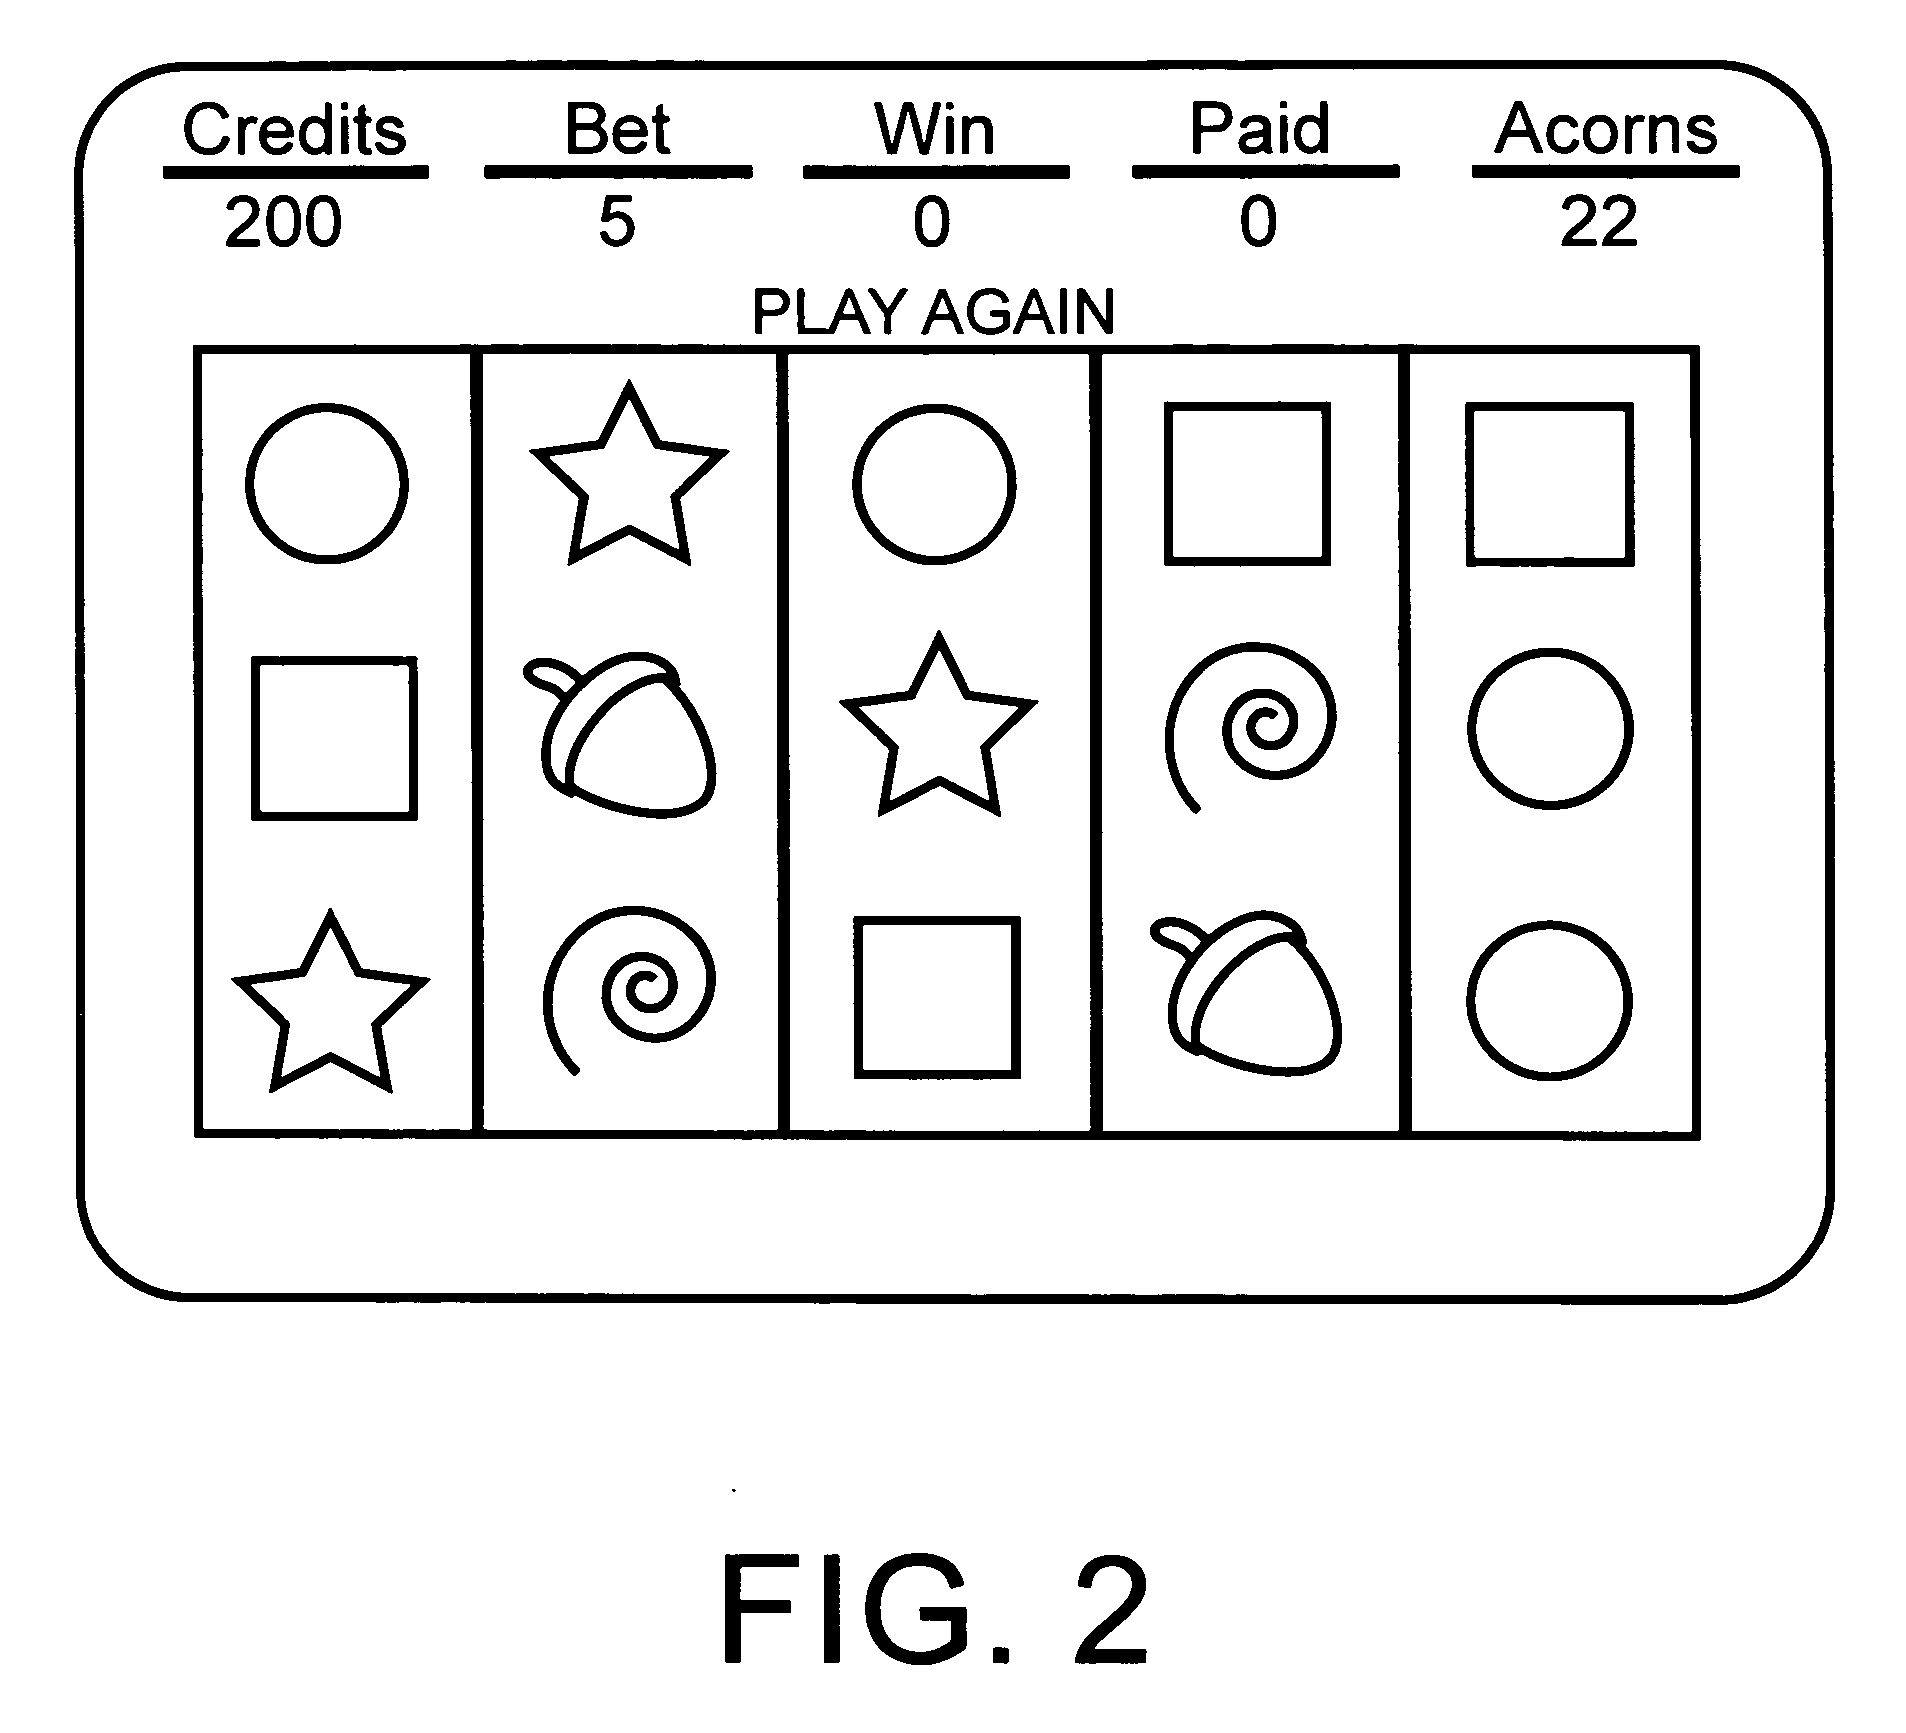 Gaming device method involving multiple classes of credits, wagering of contingent winners, a special purpose meter therefor, and a player-determinable bonus round